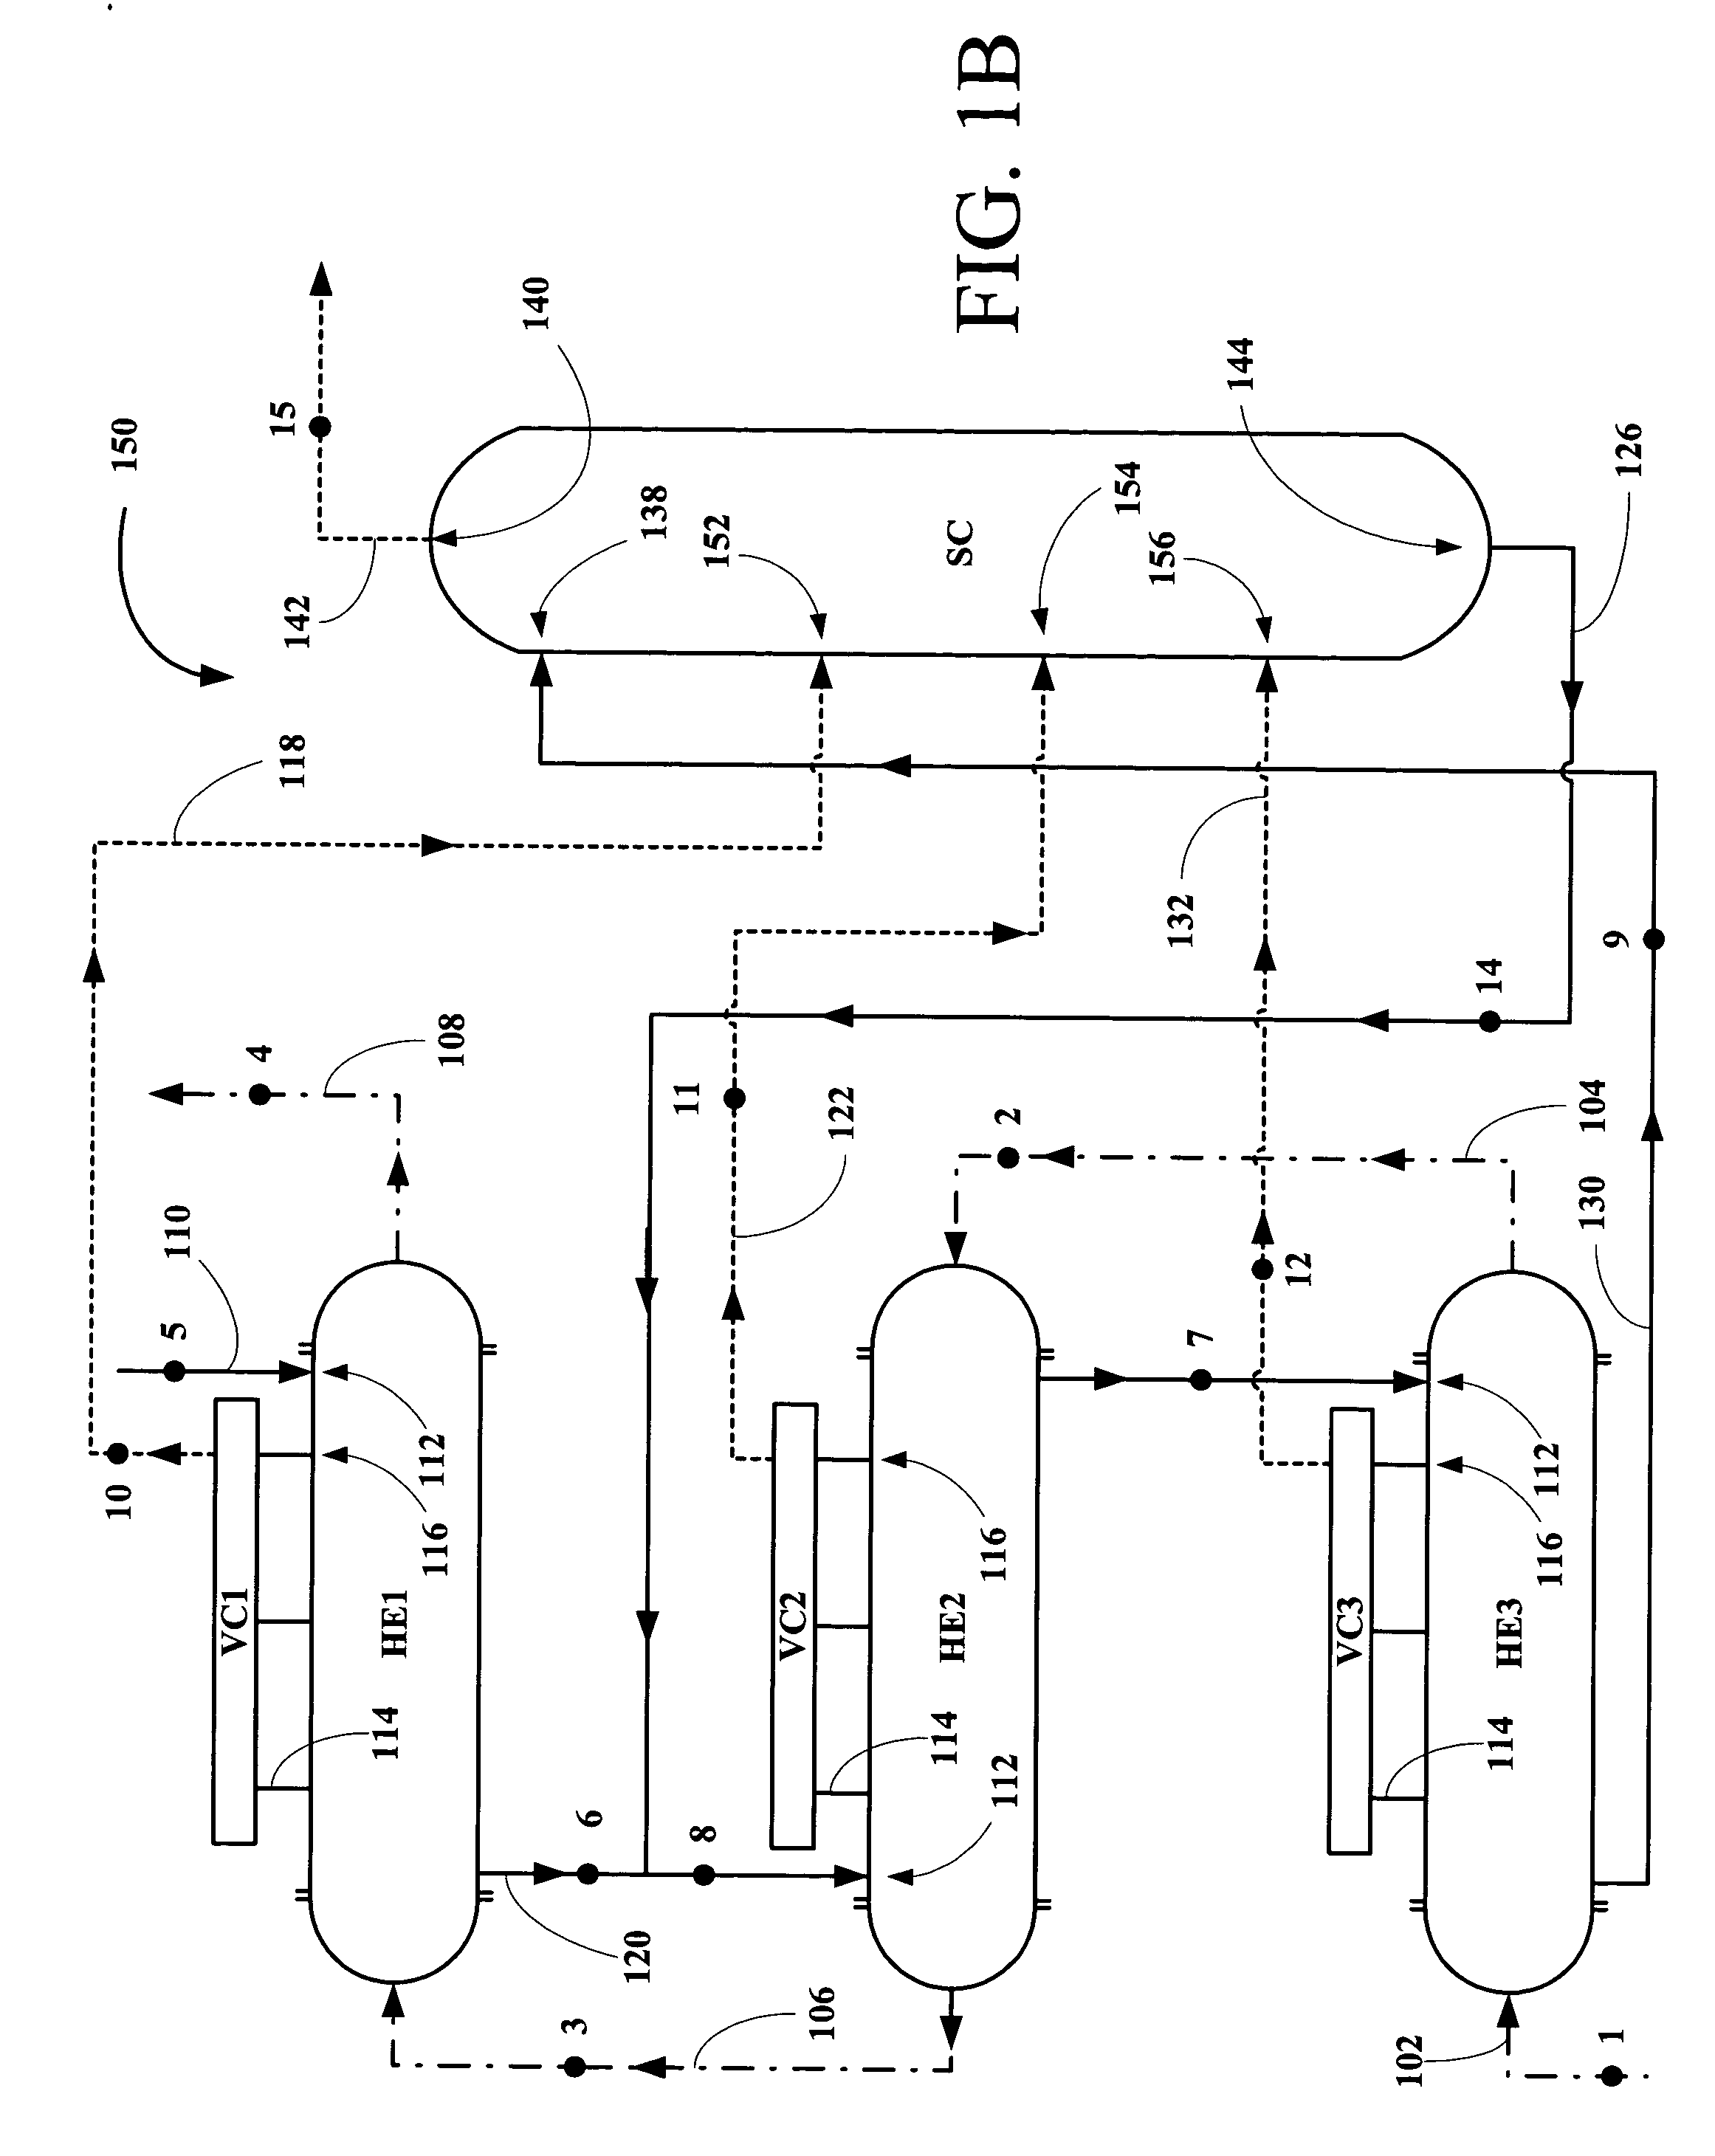 Process and apparatus for boiling add vaporizing multi-component fluids